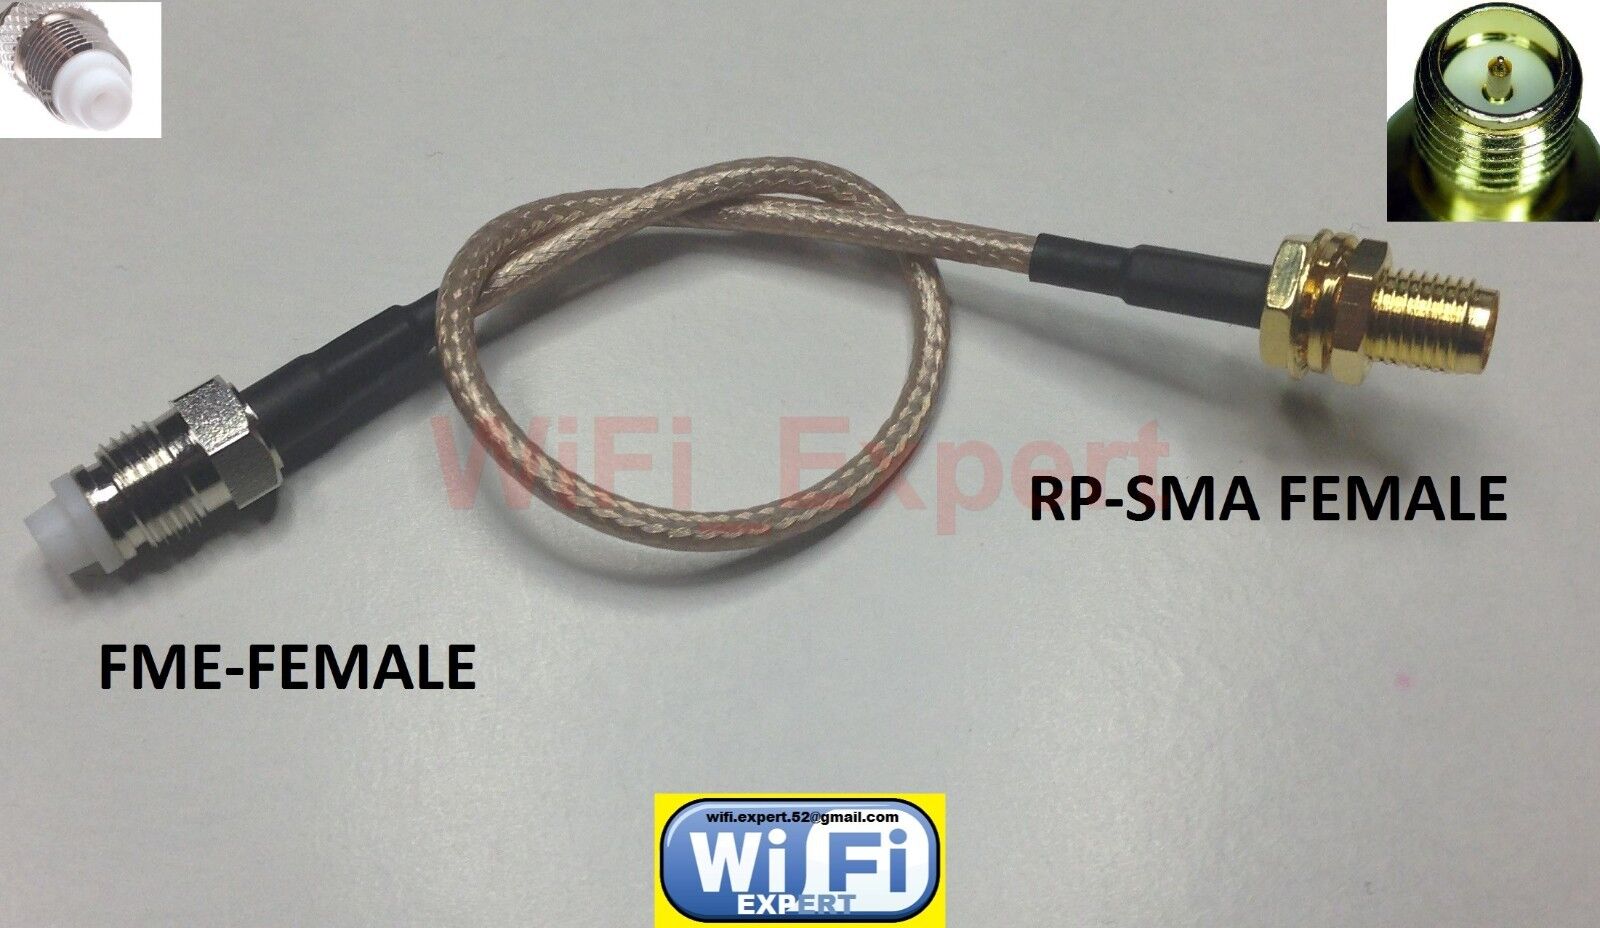 1 FME Female to RP-SMA FEMALE RF pigtail Cable COAX RG316 4-20inch USA Assembled